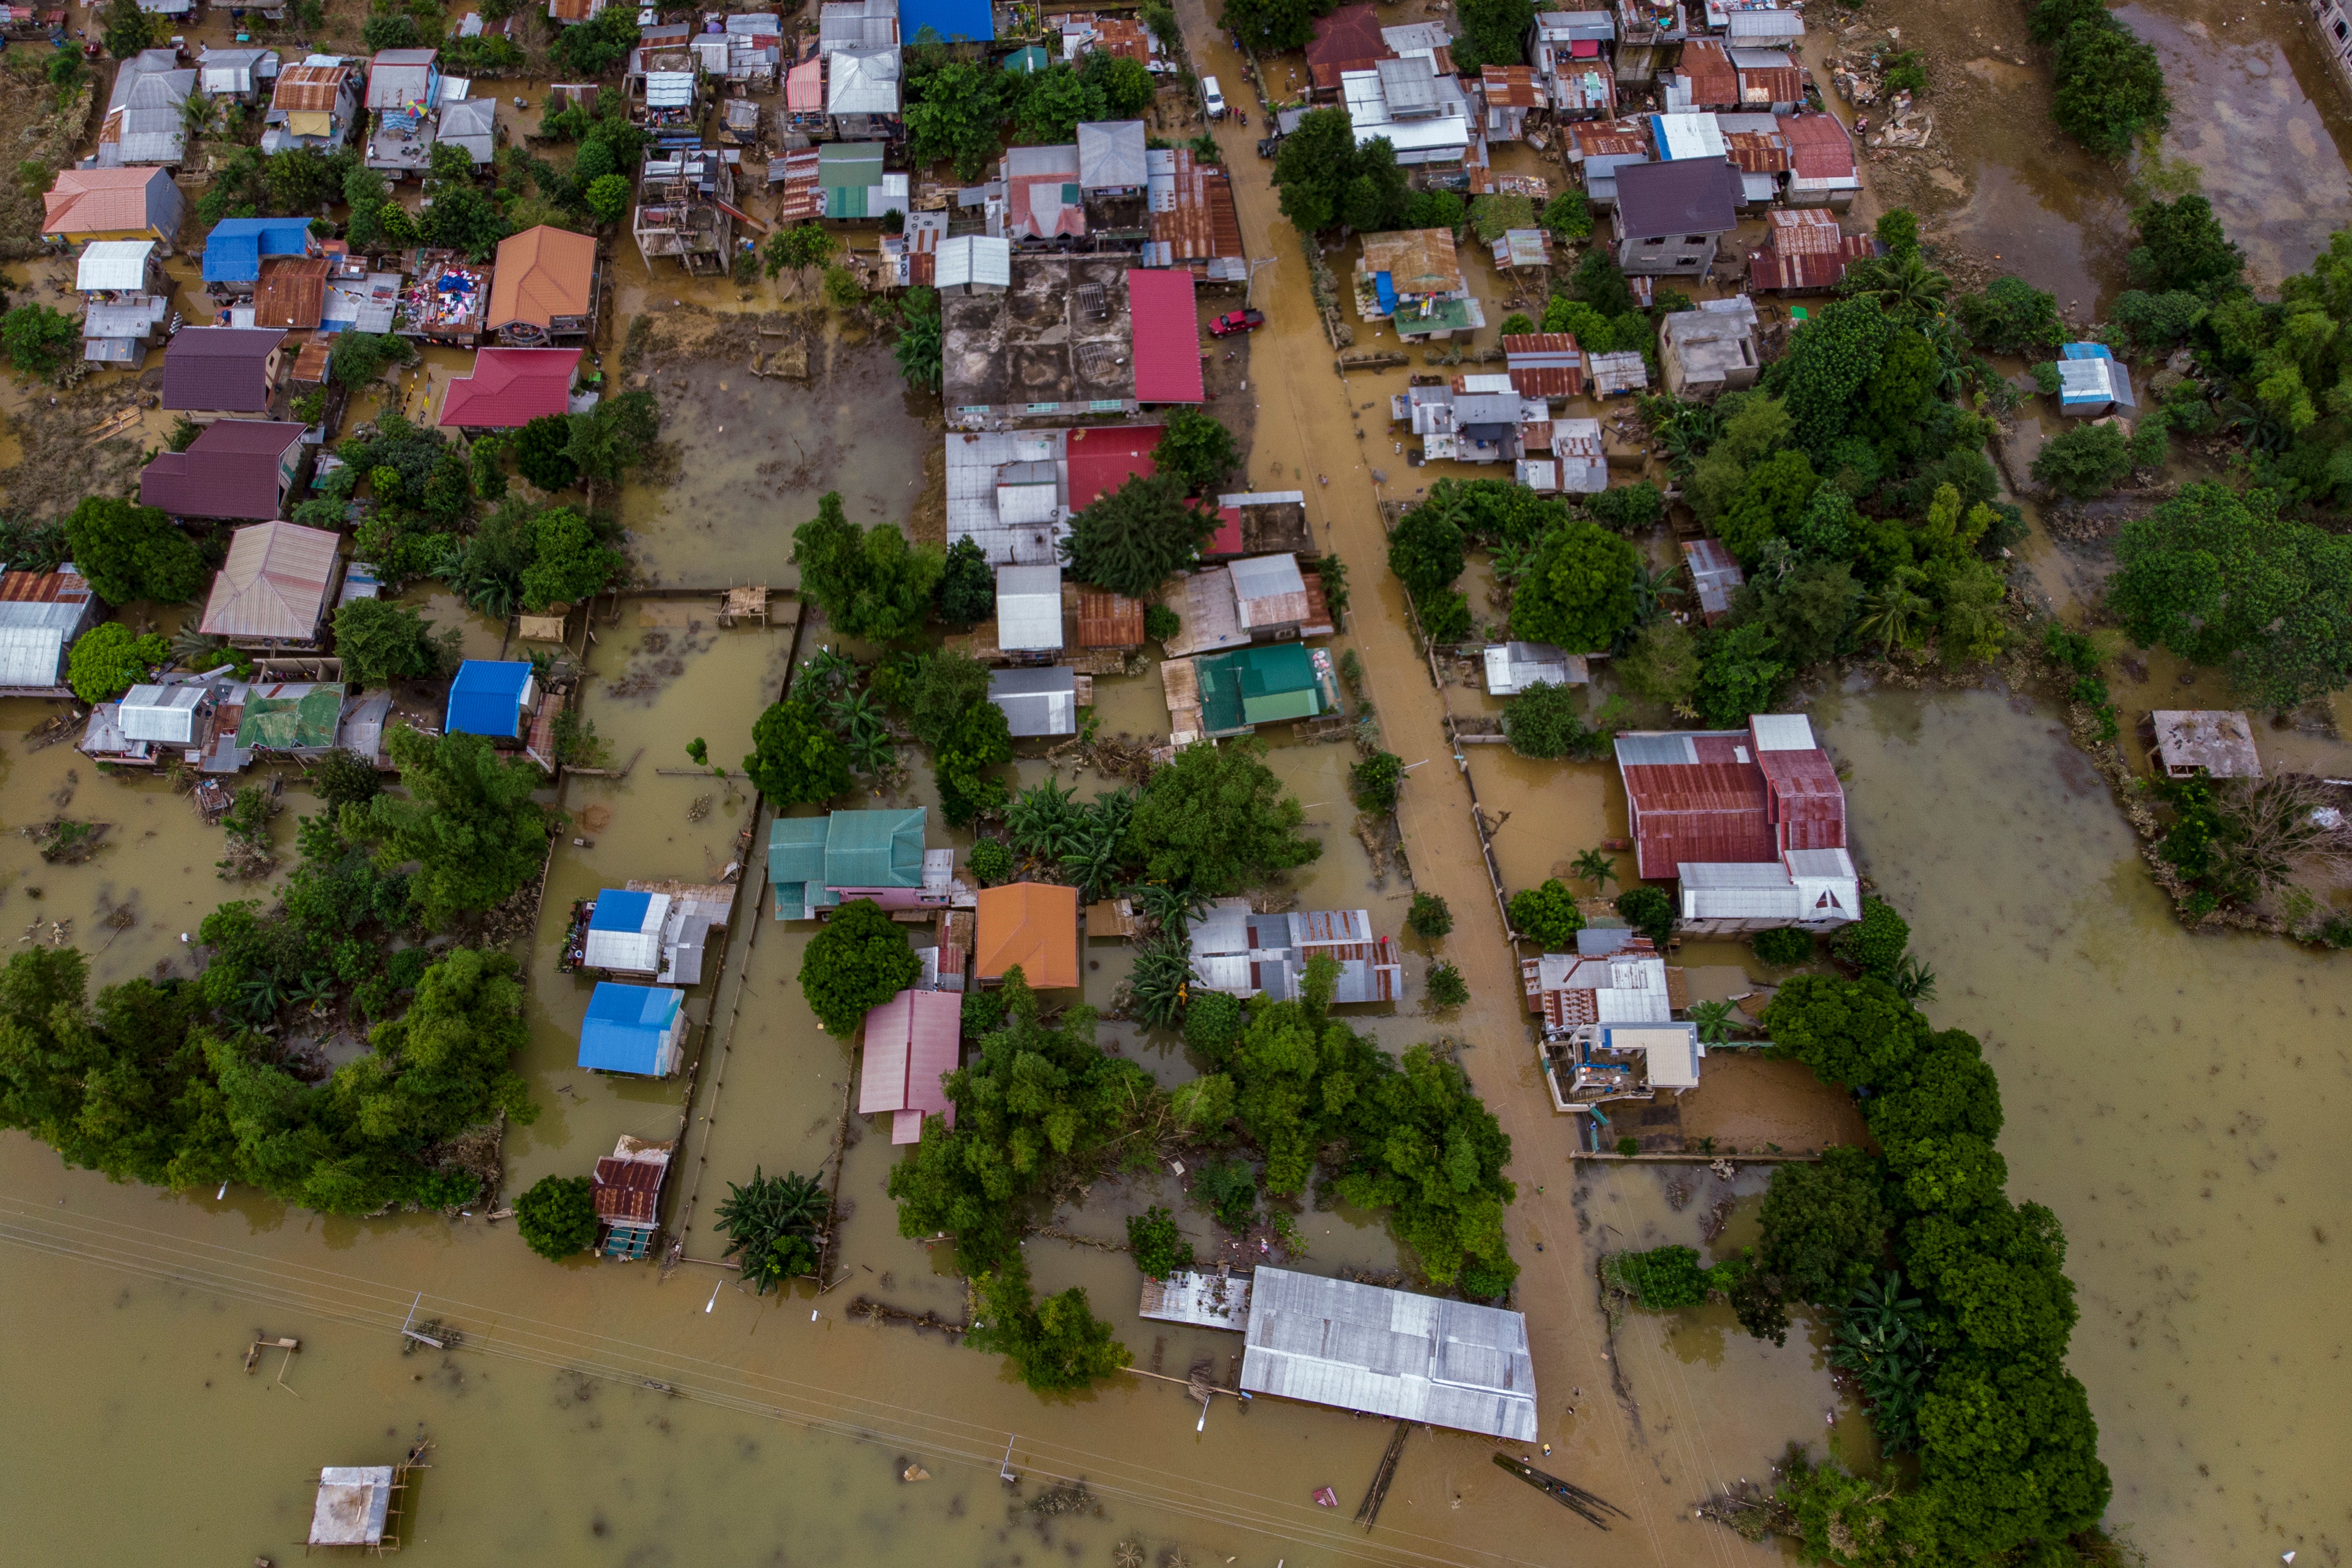 An aerial view of flooded houses after Typhoon Vamco hit on 16 November 2020